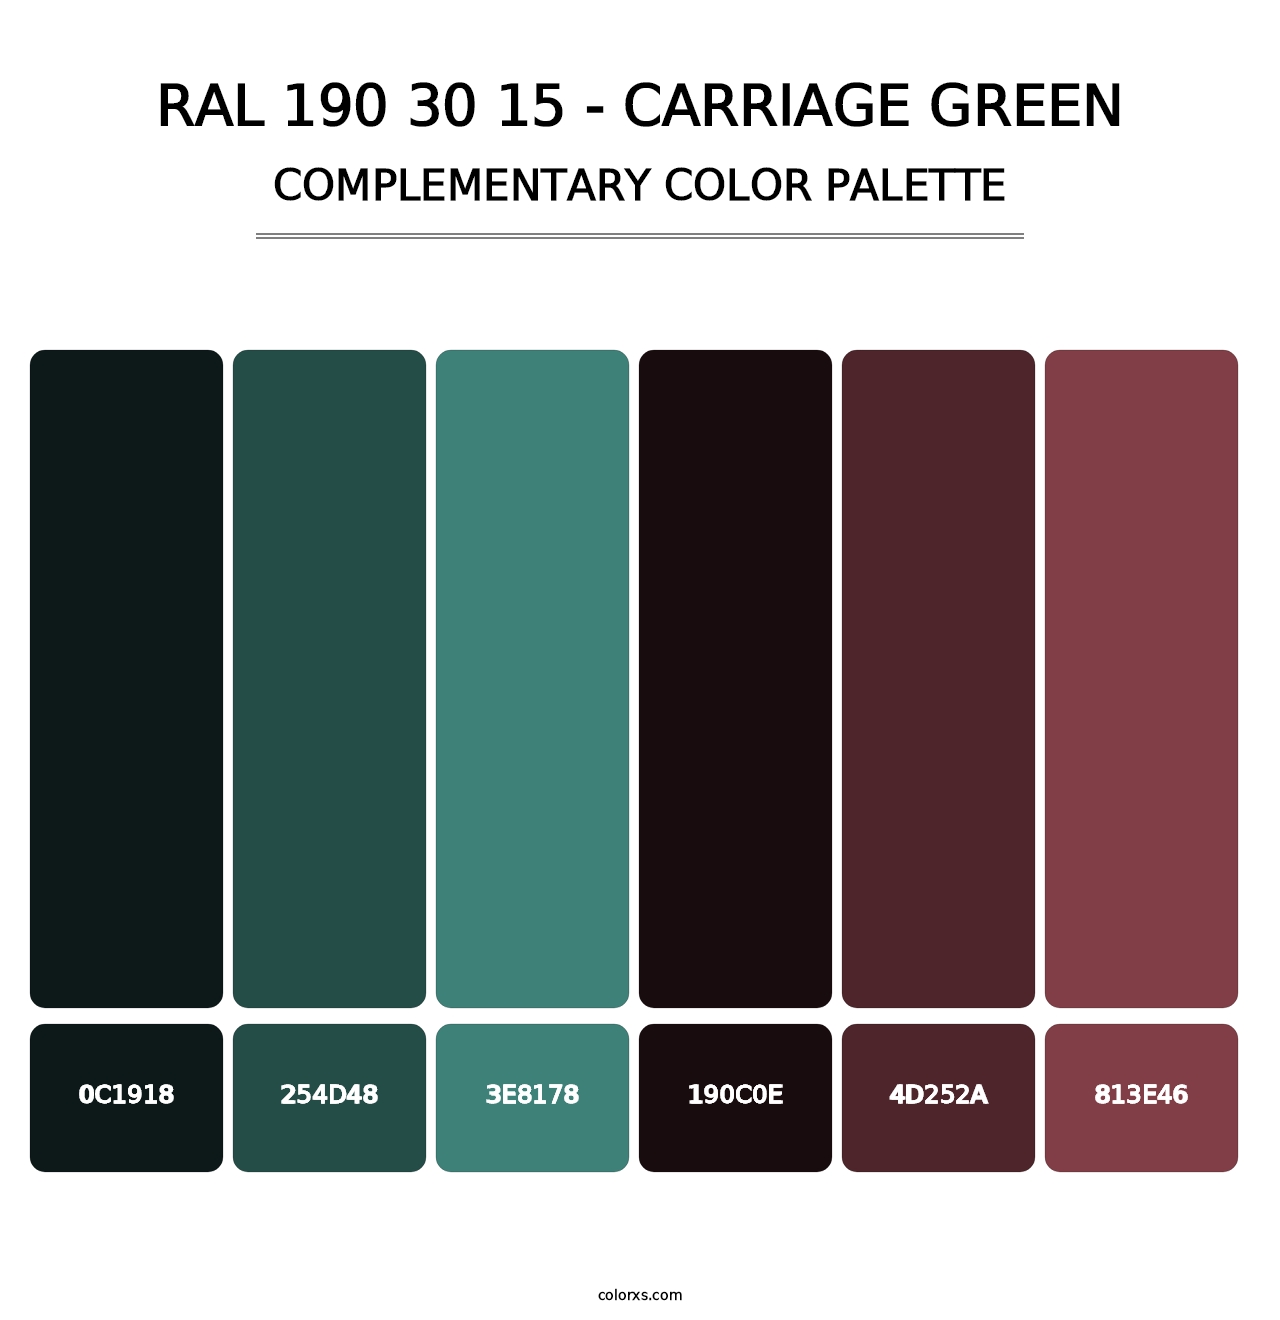 RAL 190 30 15 - Carriage Green - Complementary Color Palette